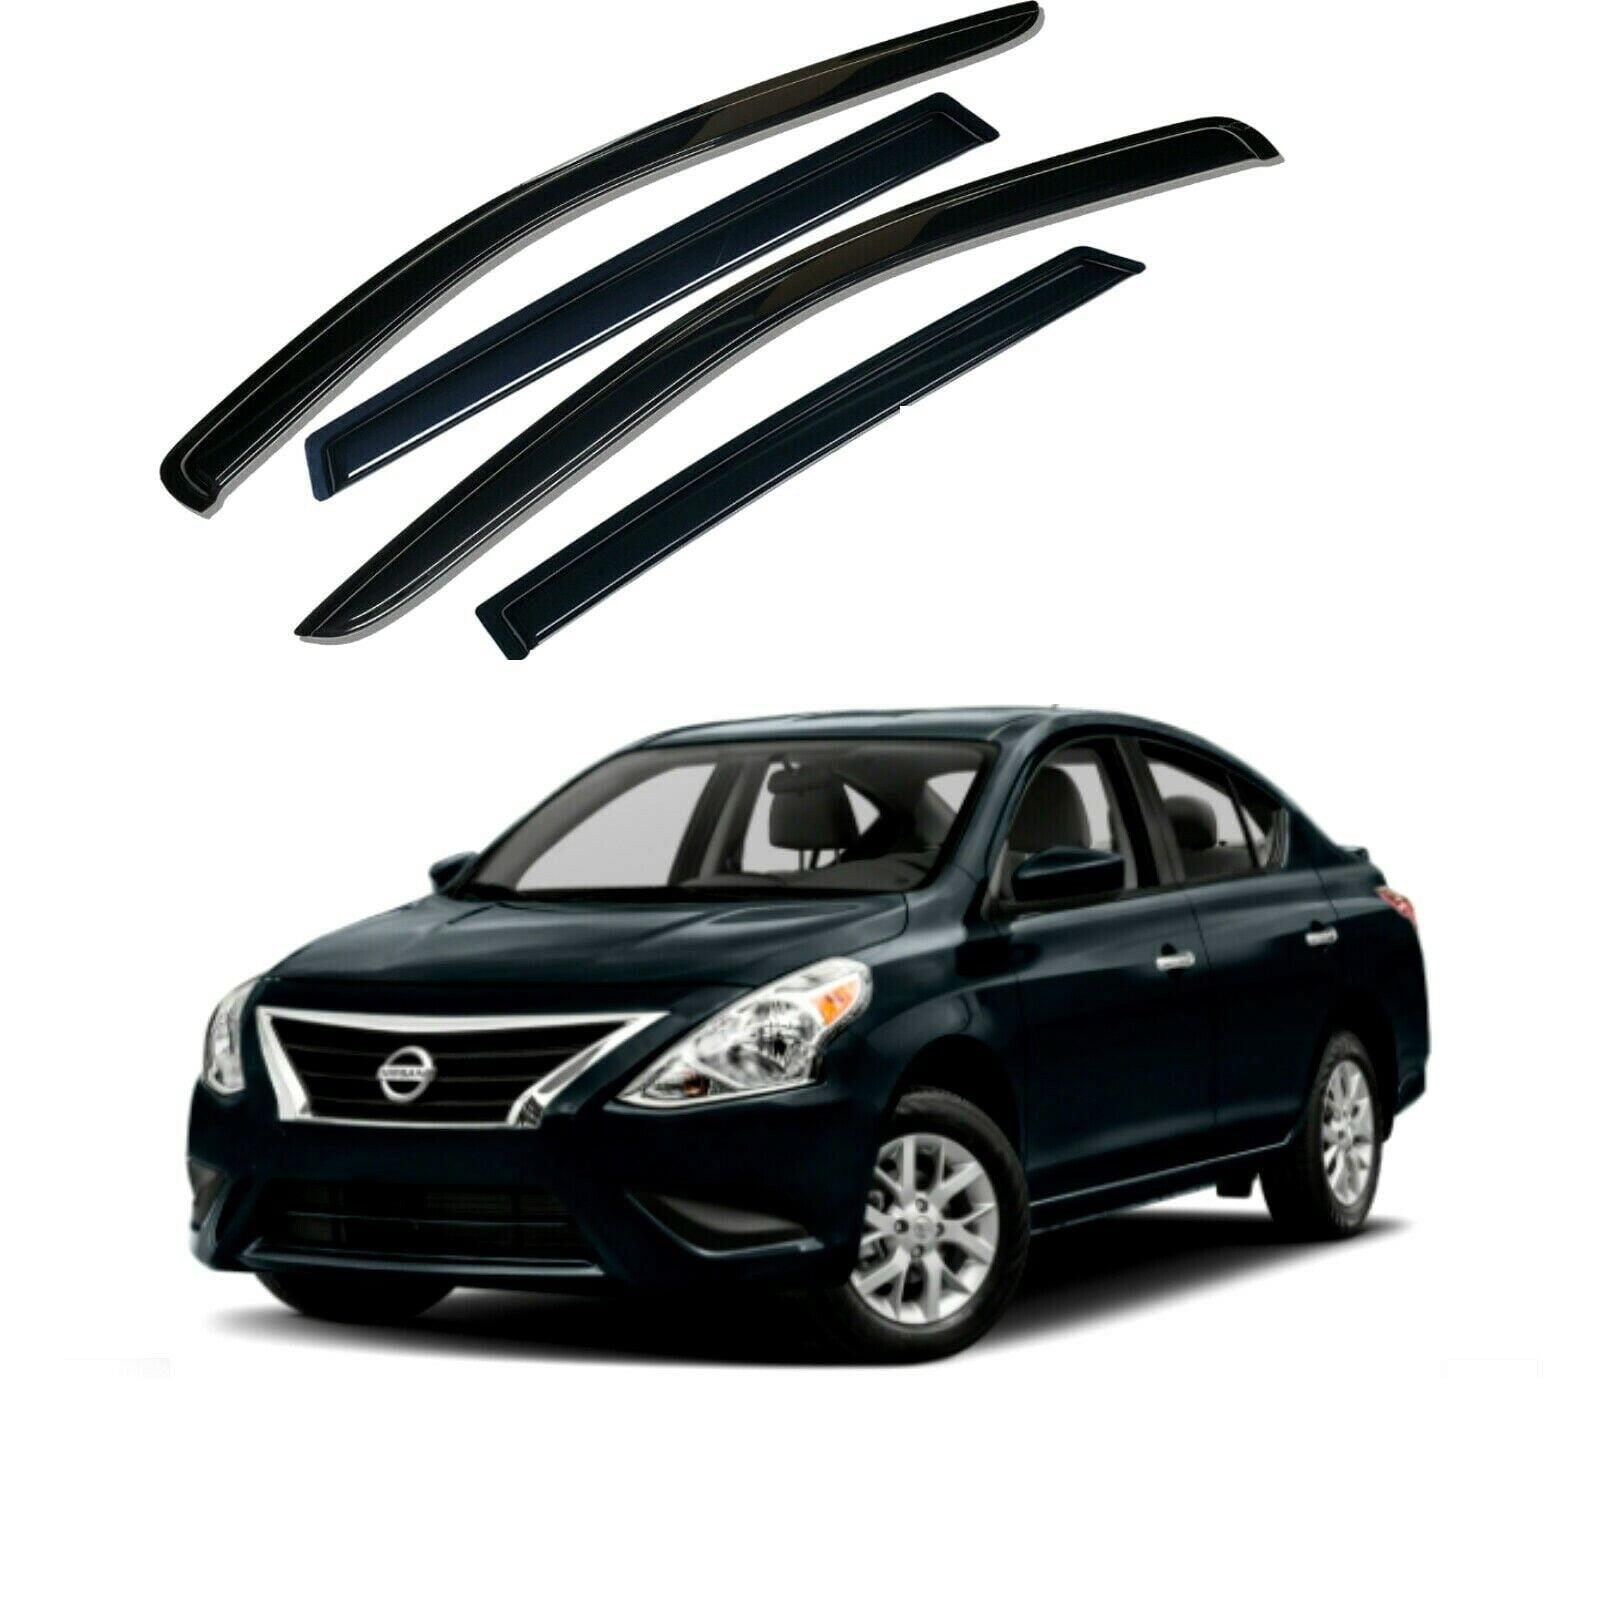 Out Channel Visors Wind Deflector Light Tint For Nissan Sentra 13-15 4pcs